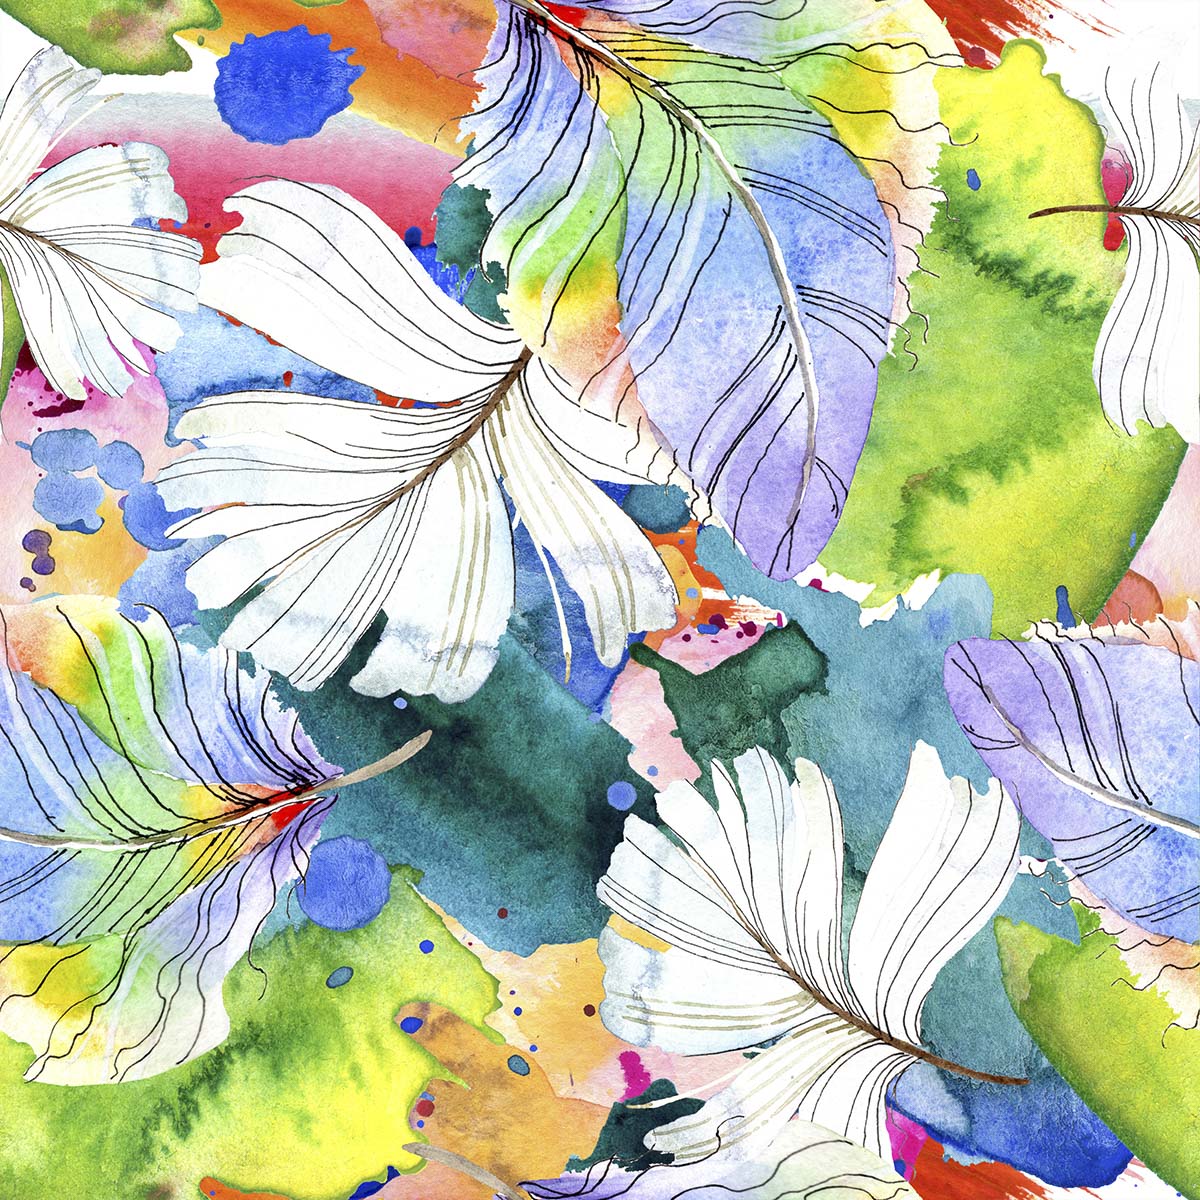 A colorful watercolor painting of feathers